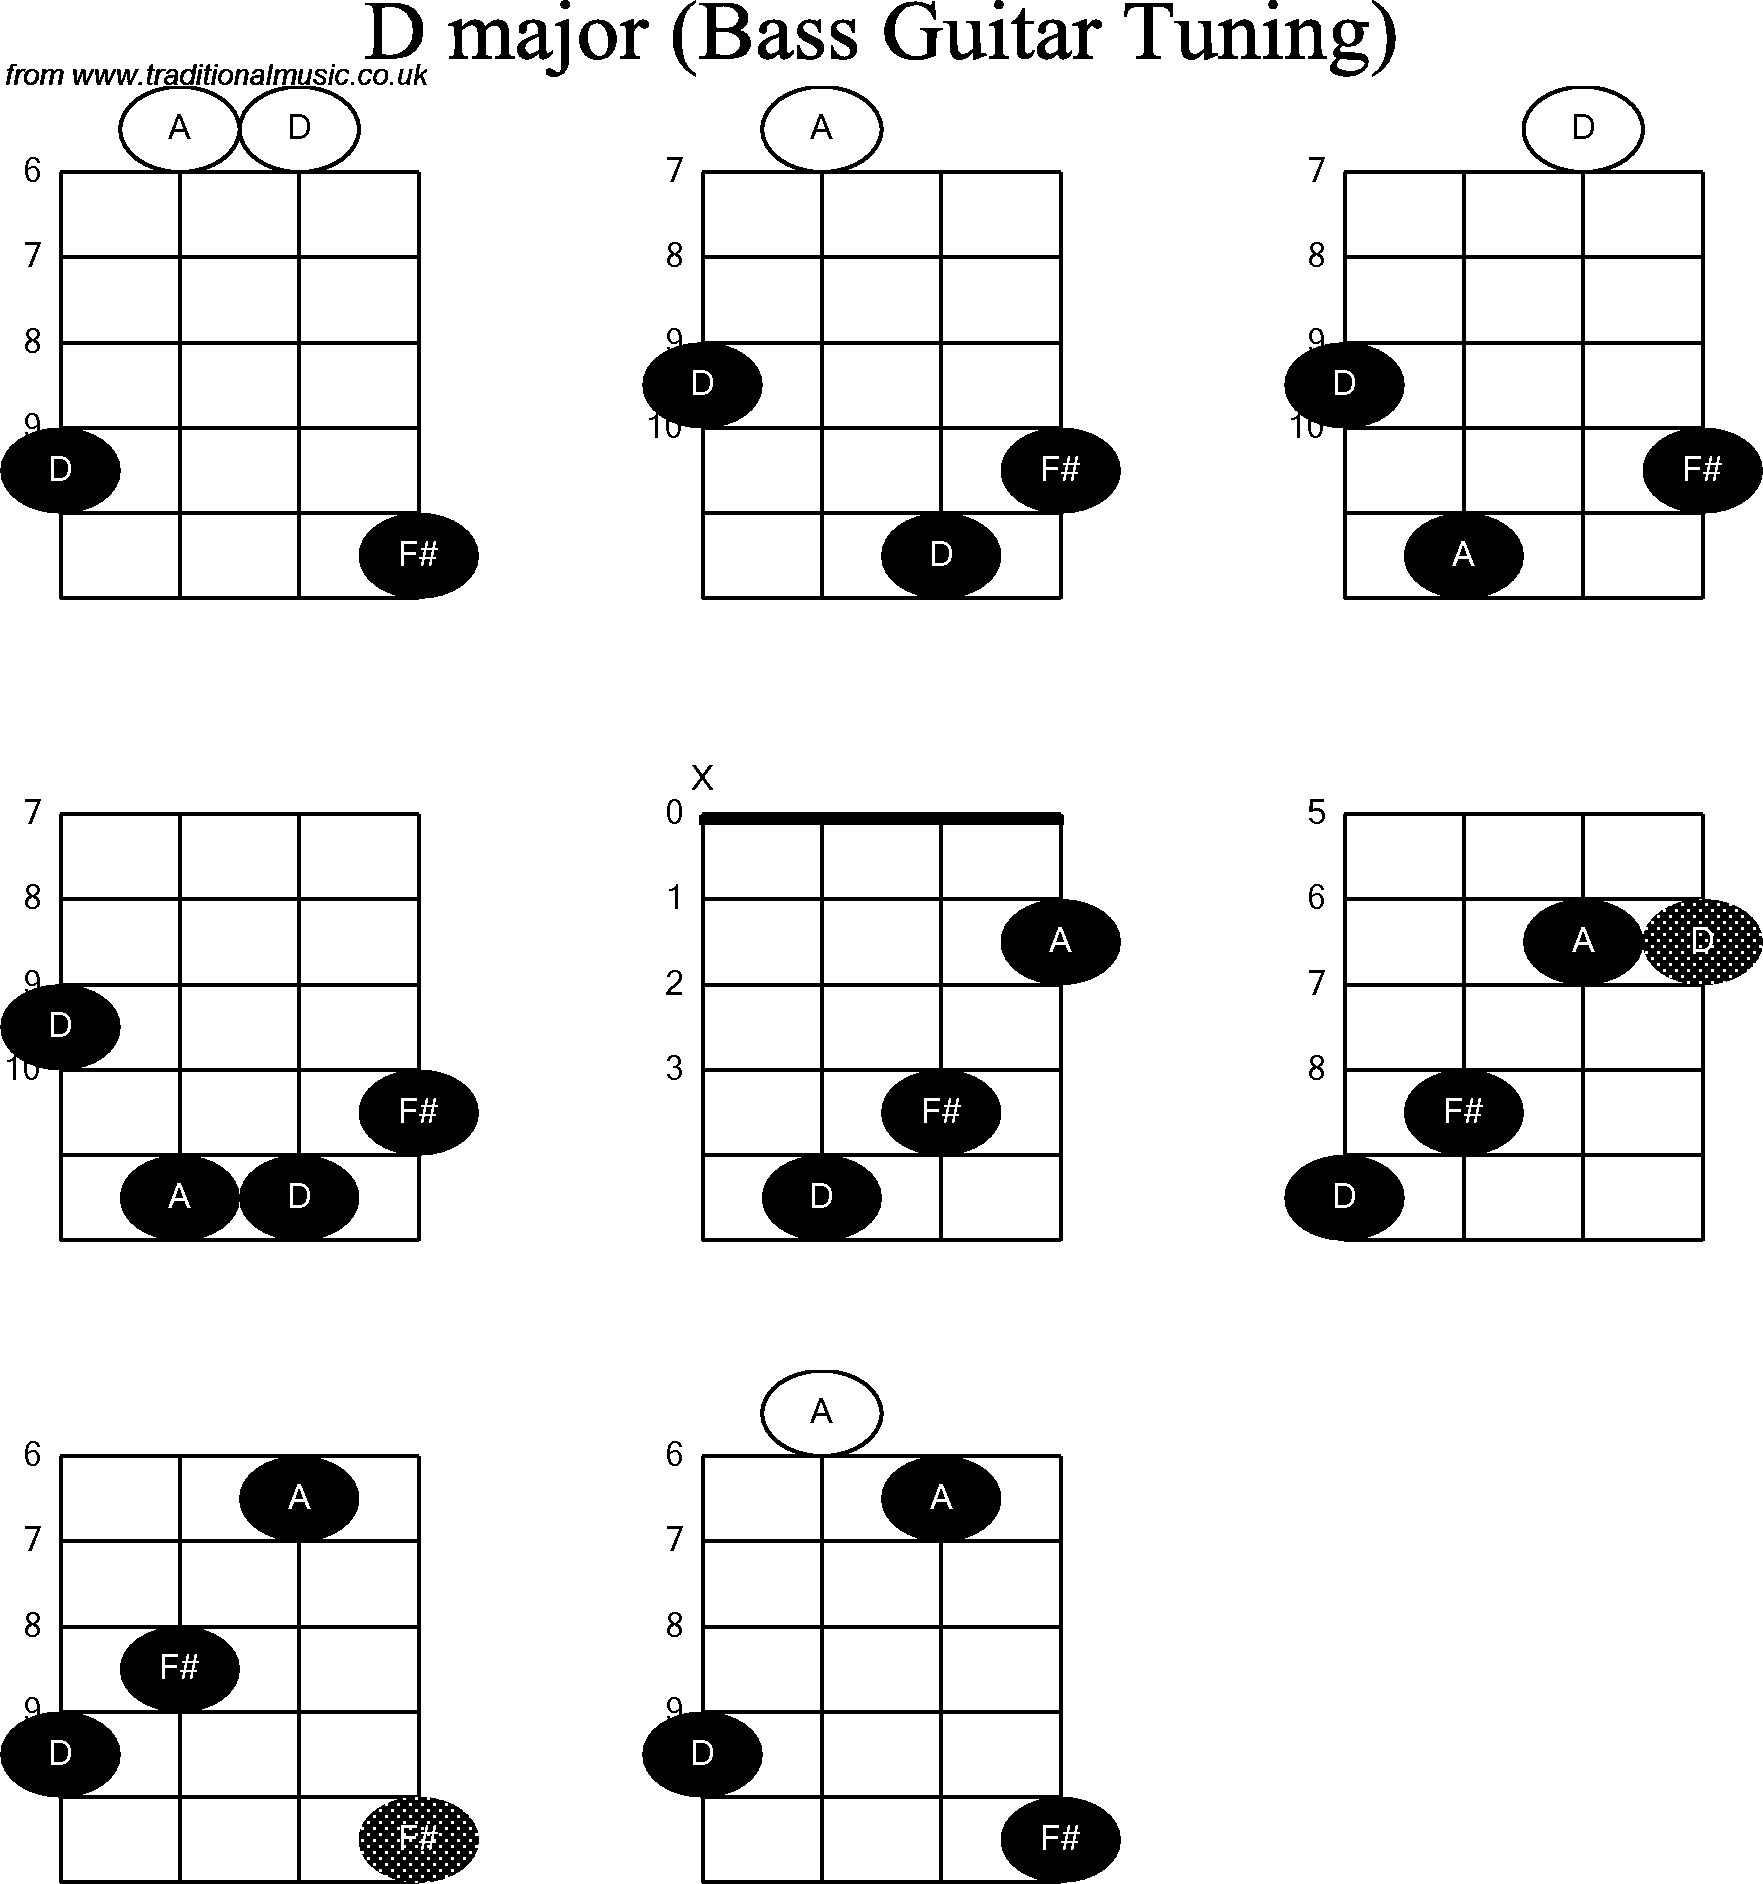 Bass Guitar chord charts for: D